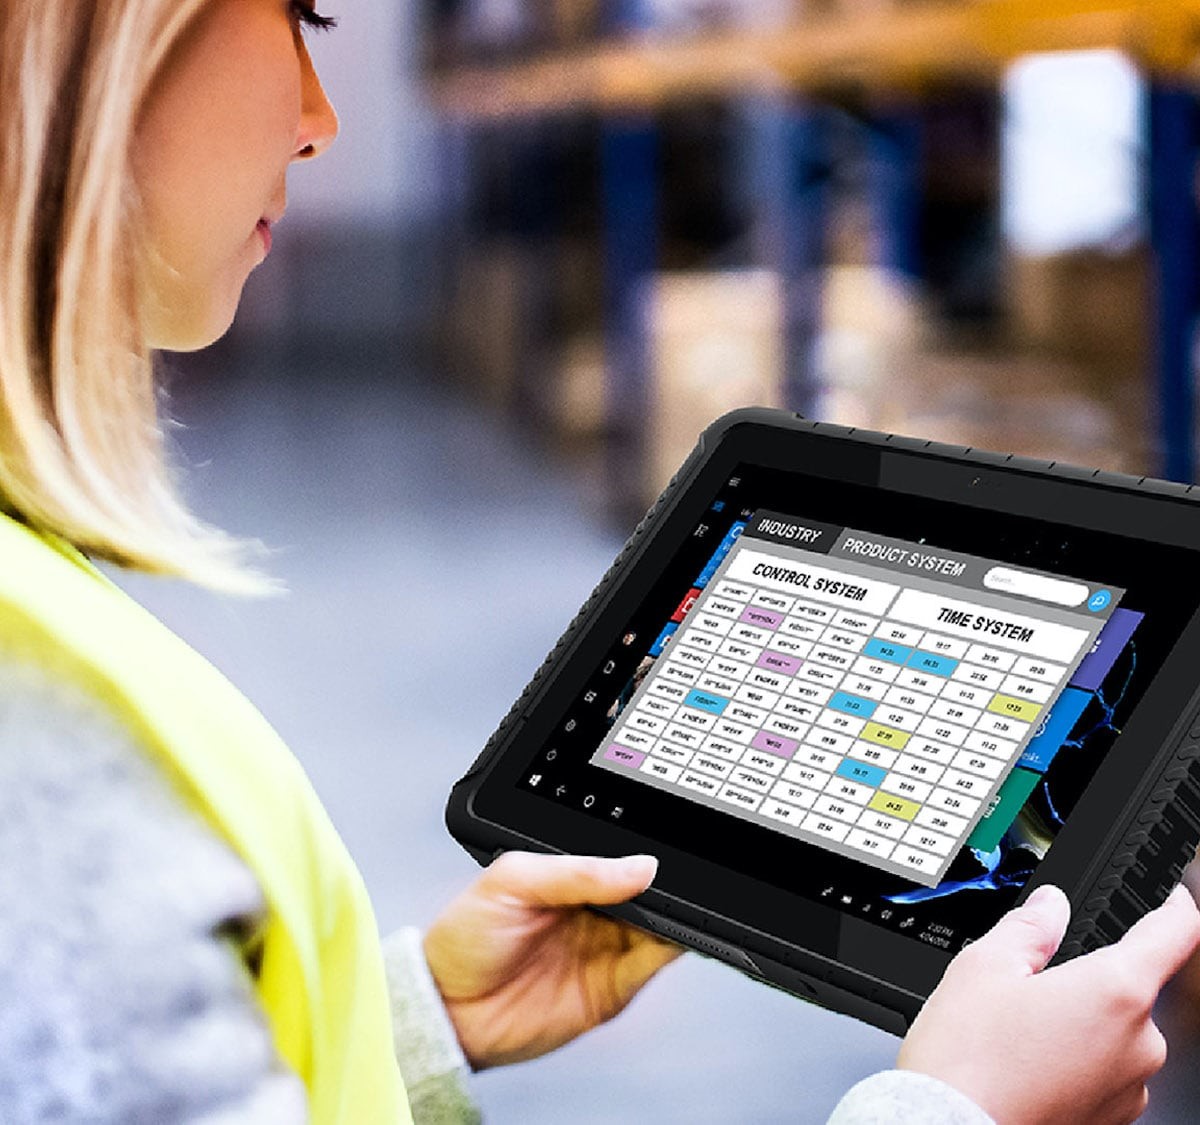 Acer Enduro T5 Rugged Tablet can handle tough work in extreme environments